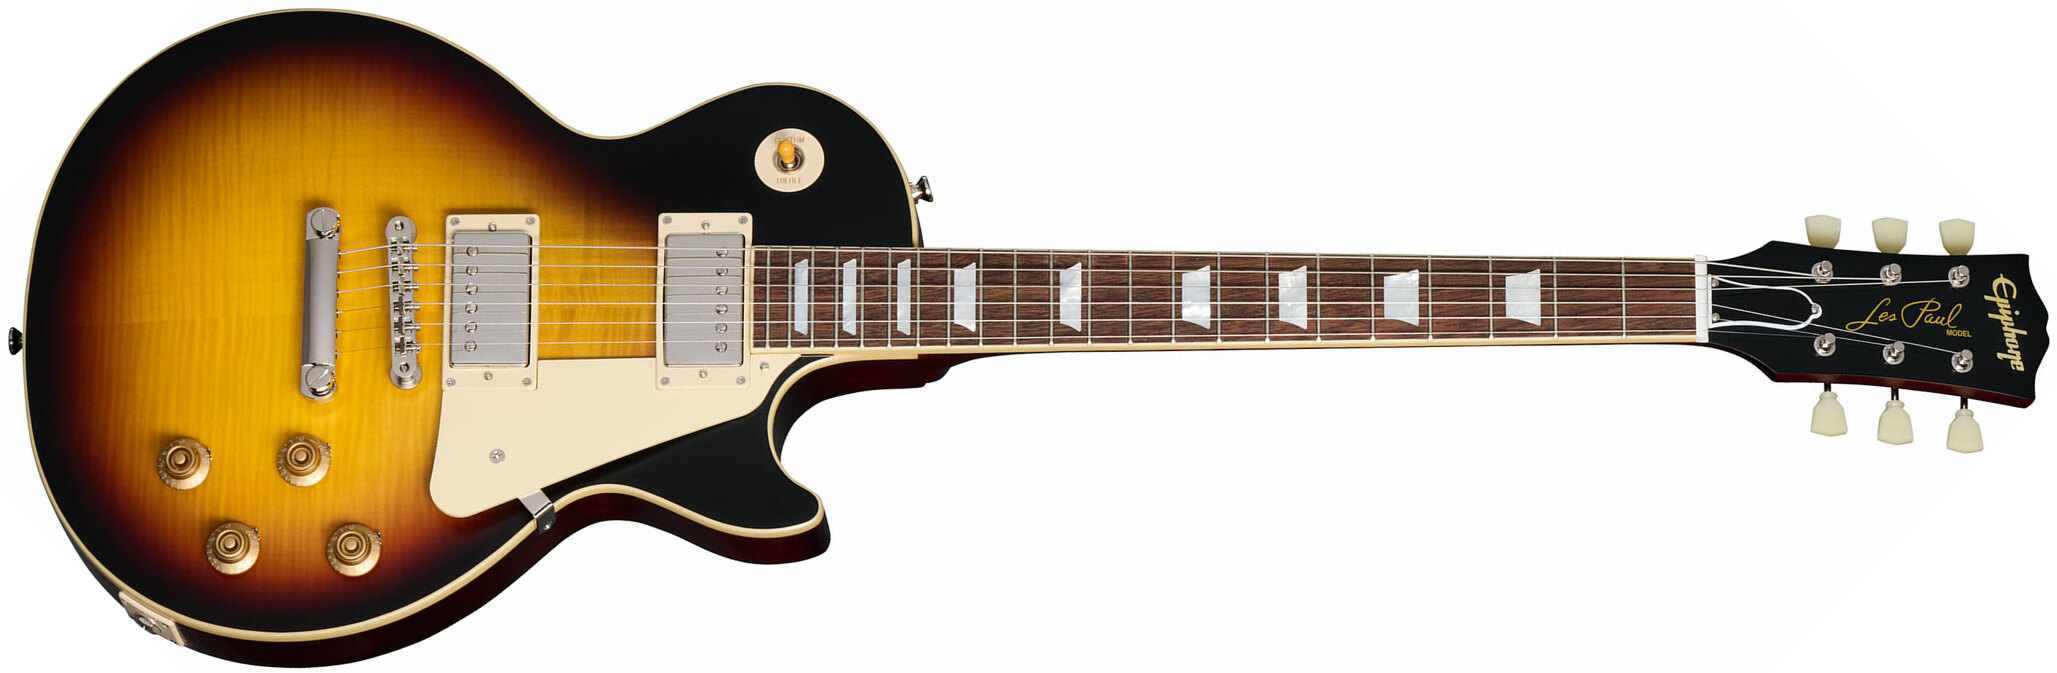 Epiphone 1959 Les Paul Standard Inspired By 2h Gibson Ht Lau - Vos Tobacco Burst - Single cut electric guitar - Main picture